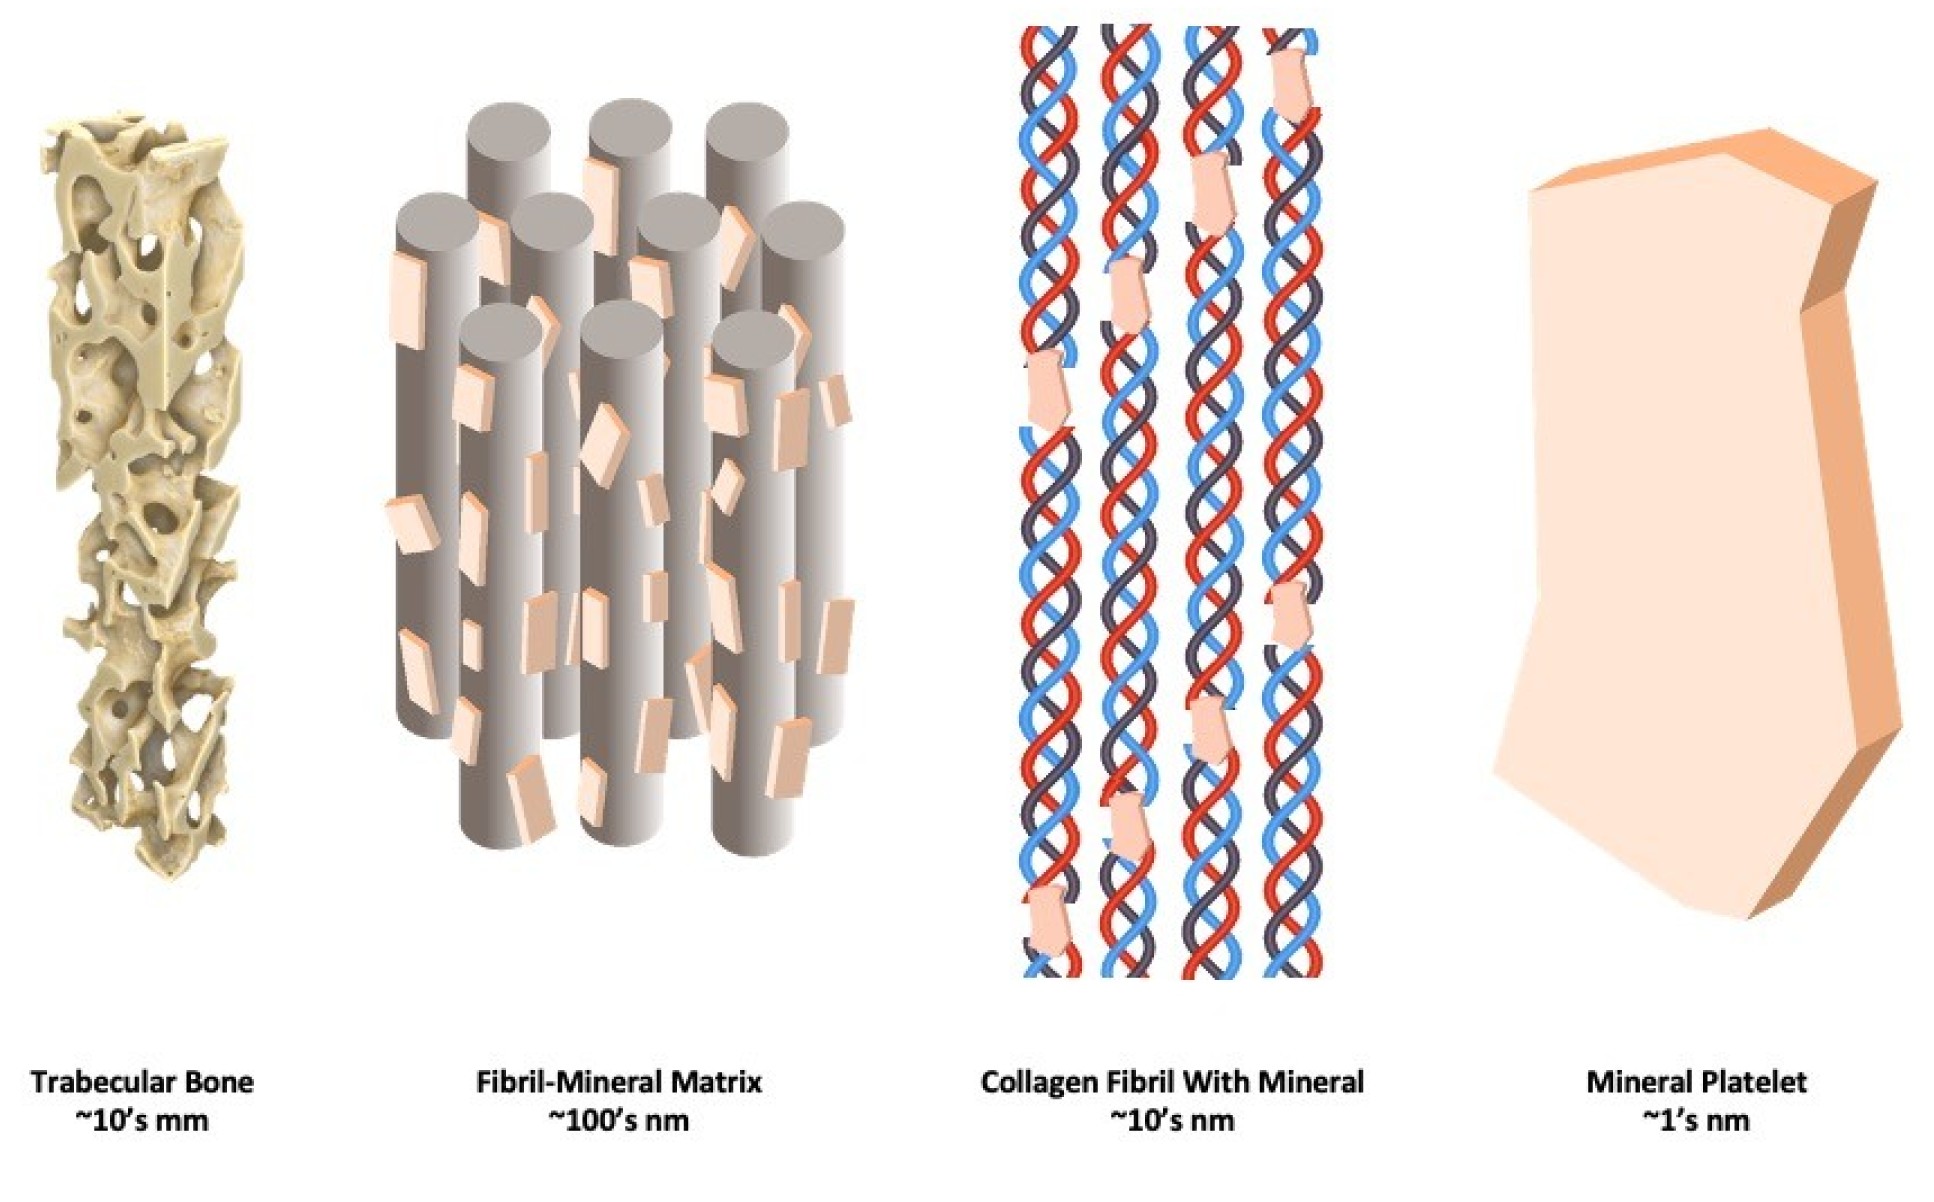 Image showing the various microstructures (mineral and collagen) of bone